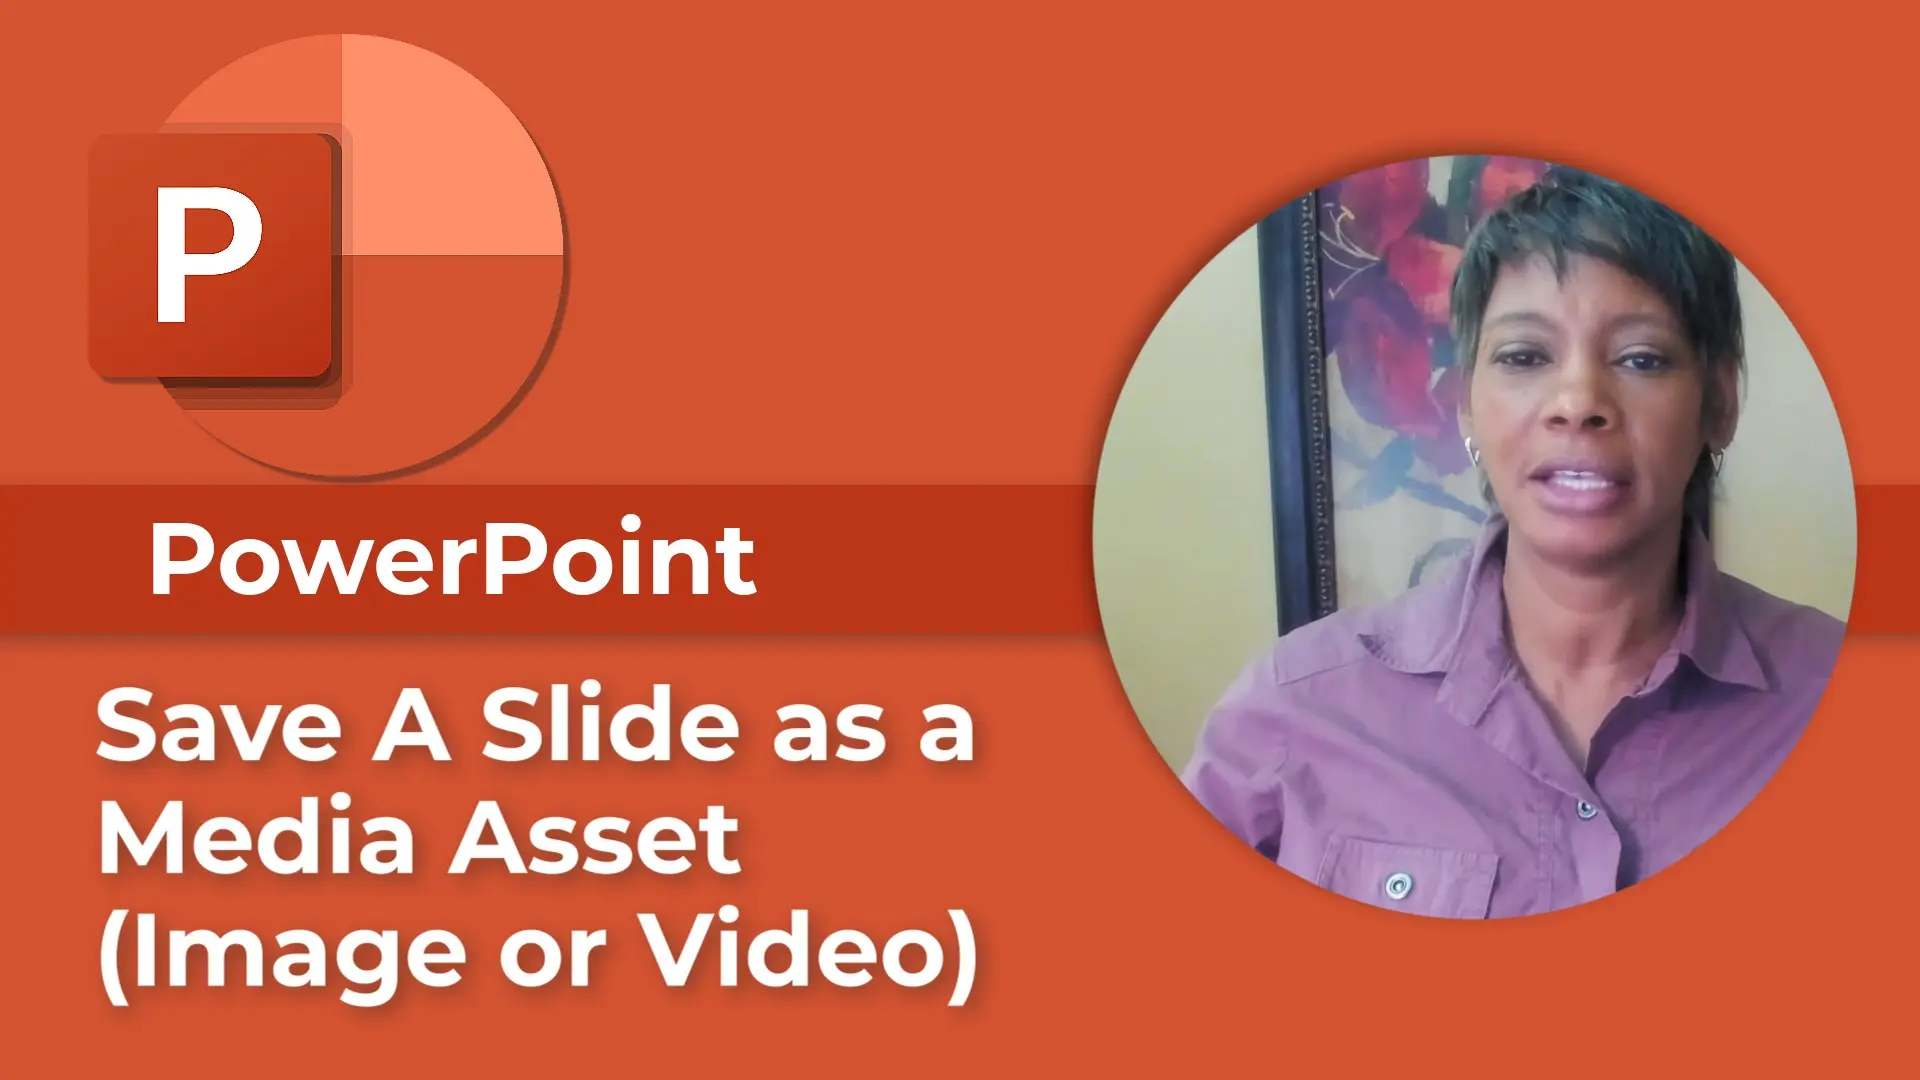 PowerPoint: Save a Slide as a Media Asset